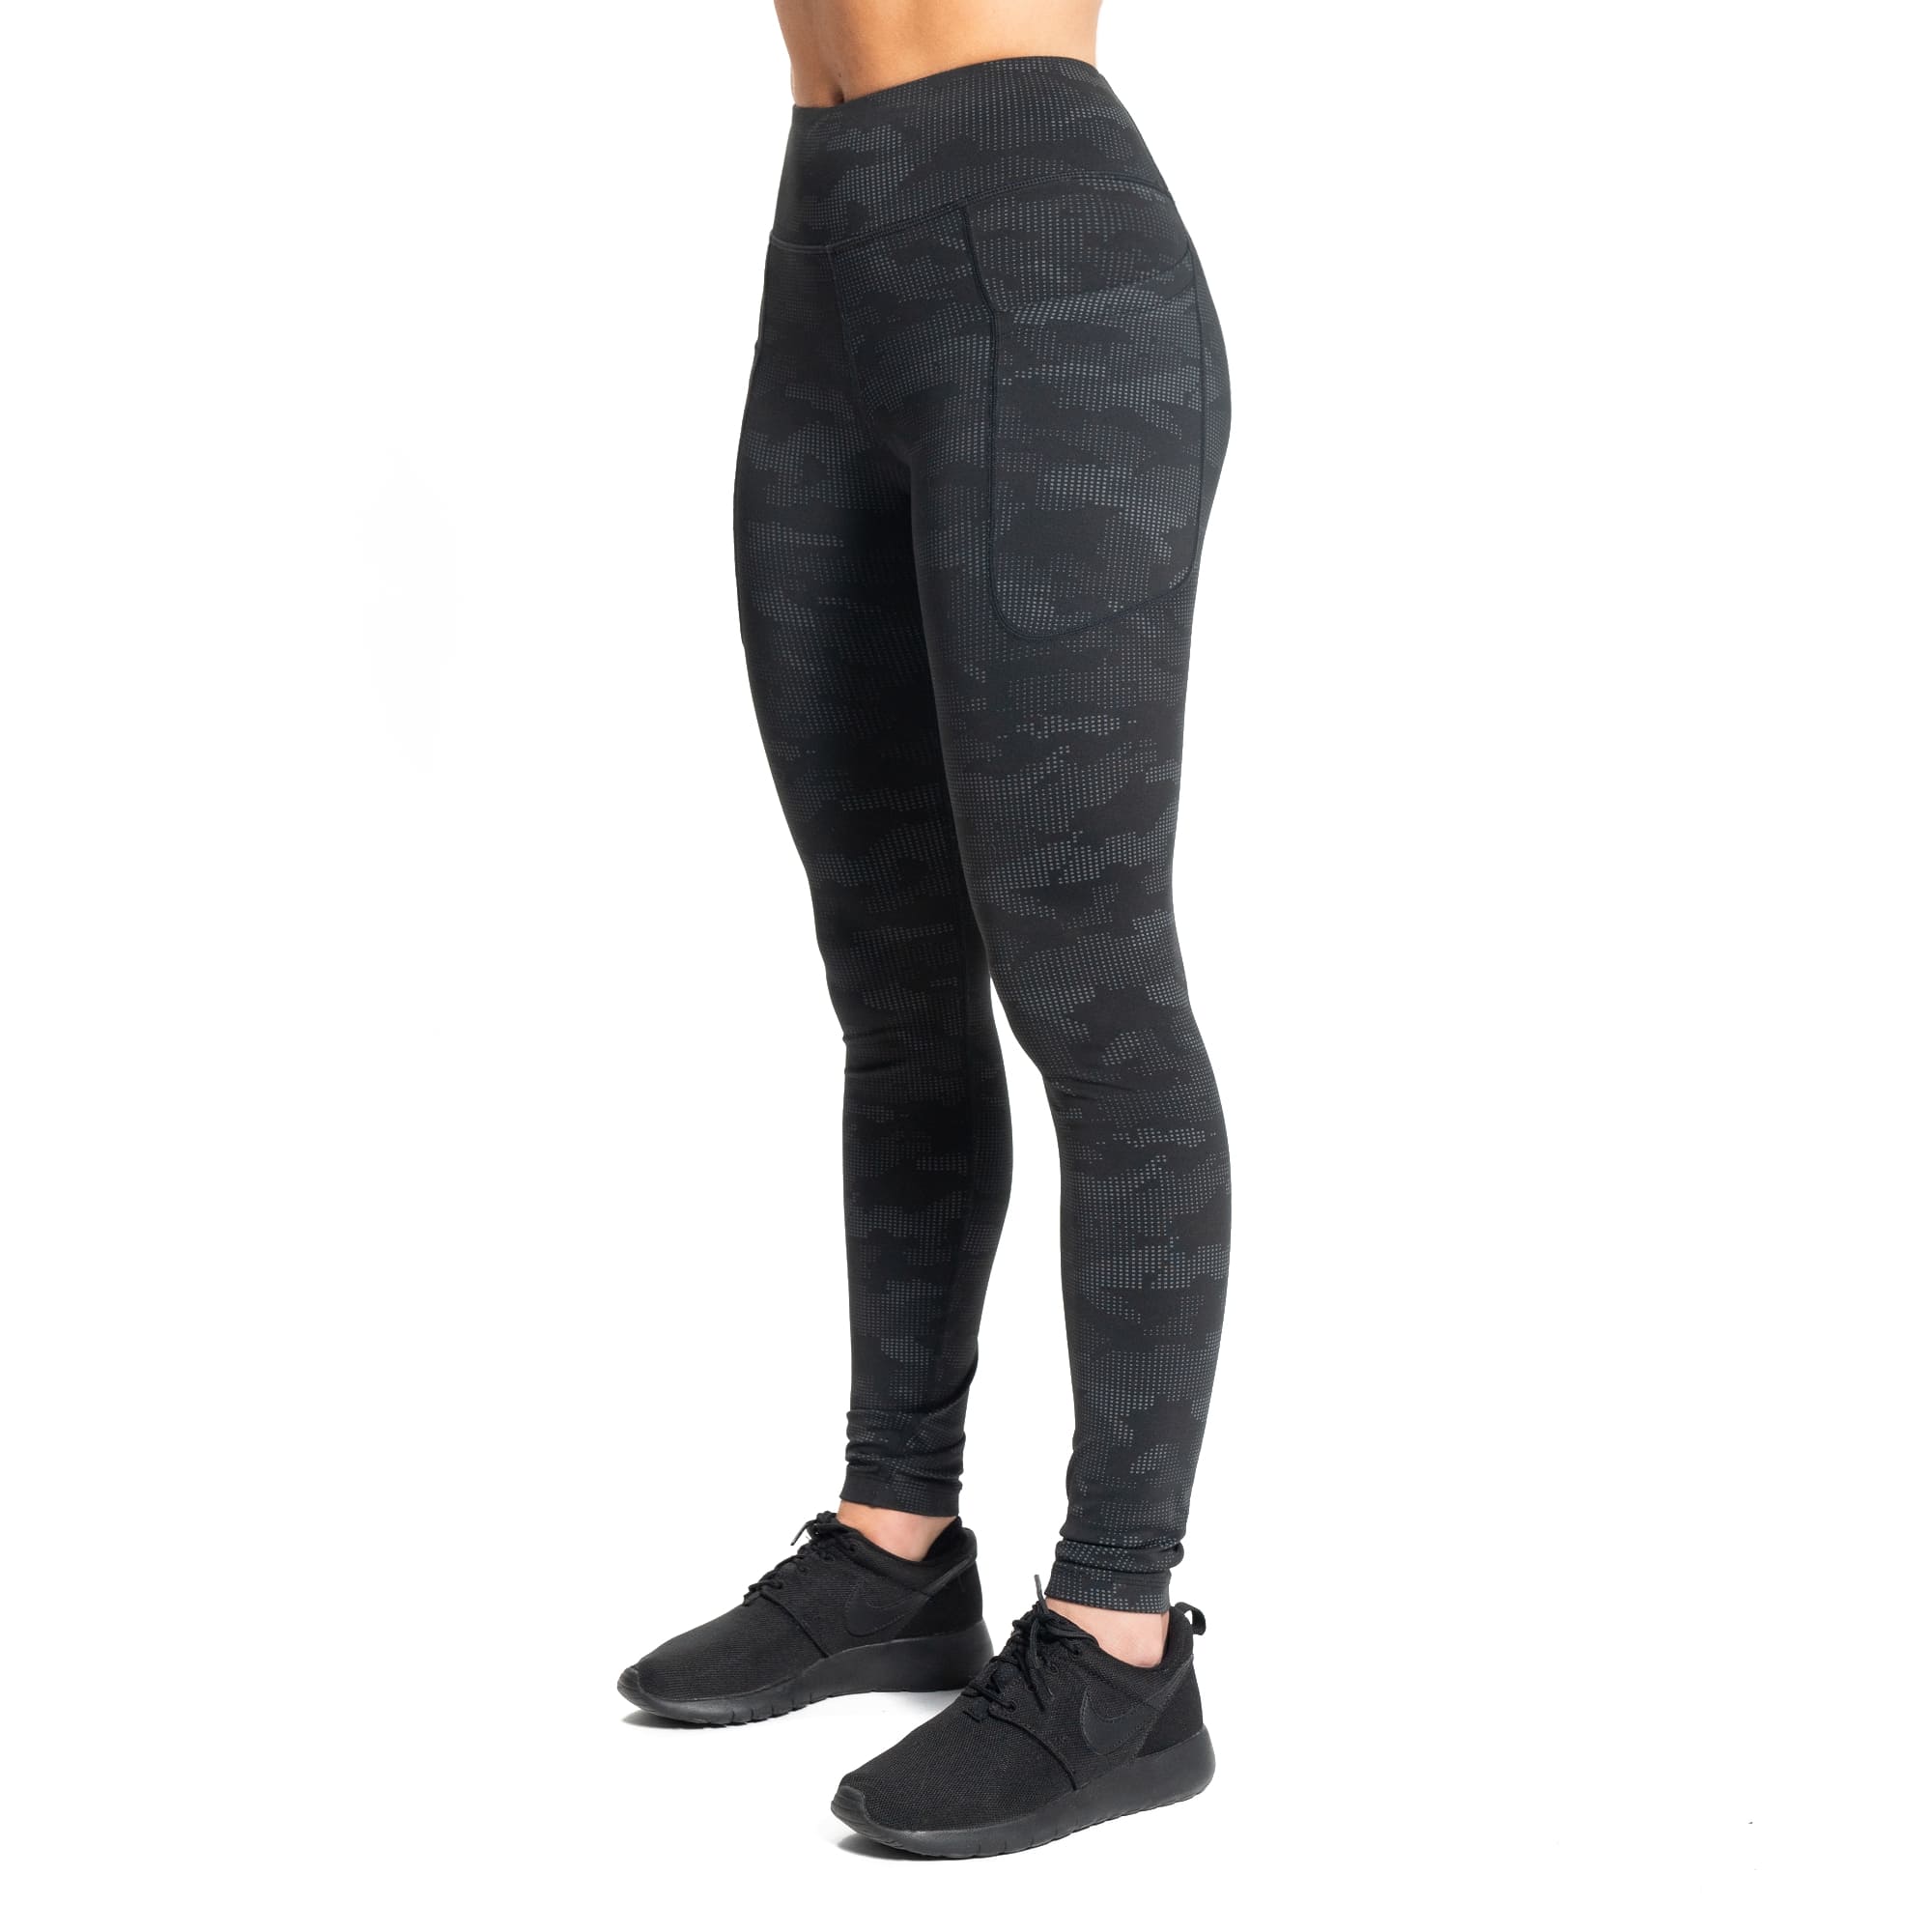 Yogalicious Lux Camo High Waisted Side Pocket Black Gray Leggings Size  Small - $15 - From Kelly